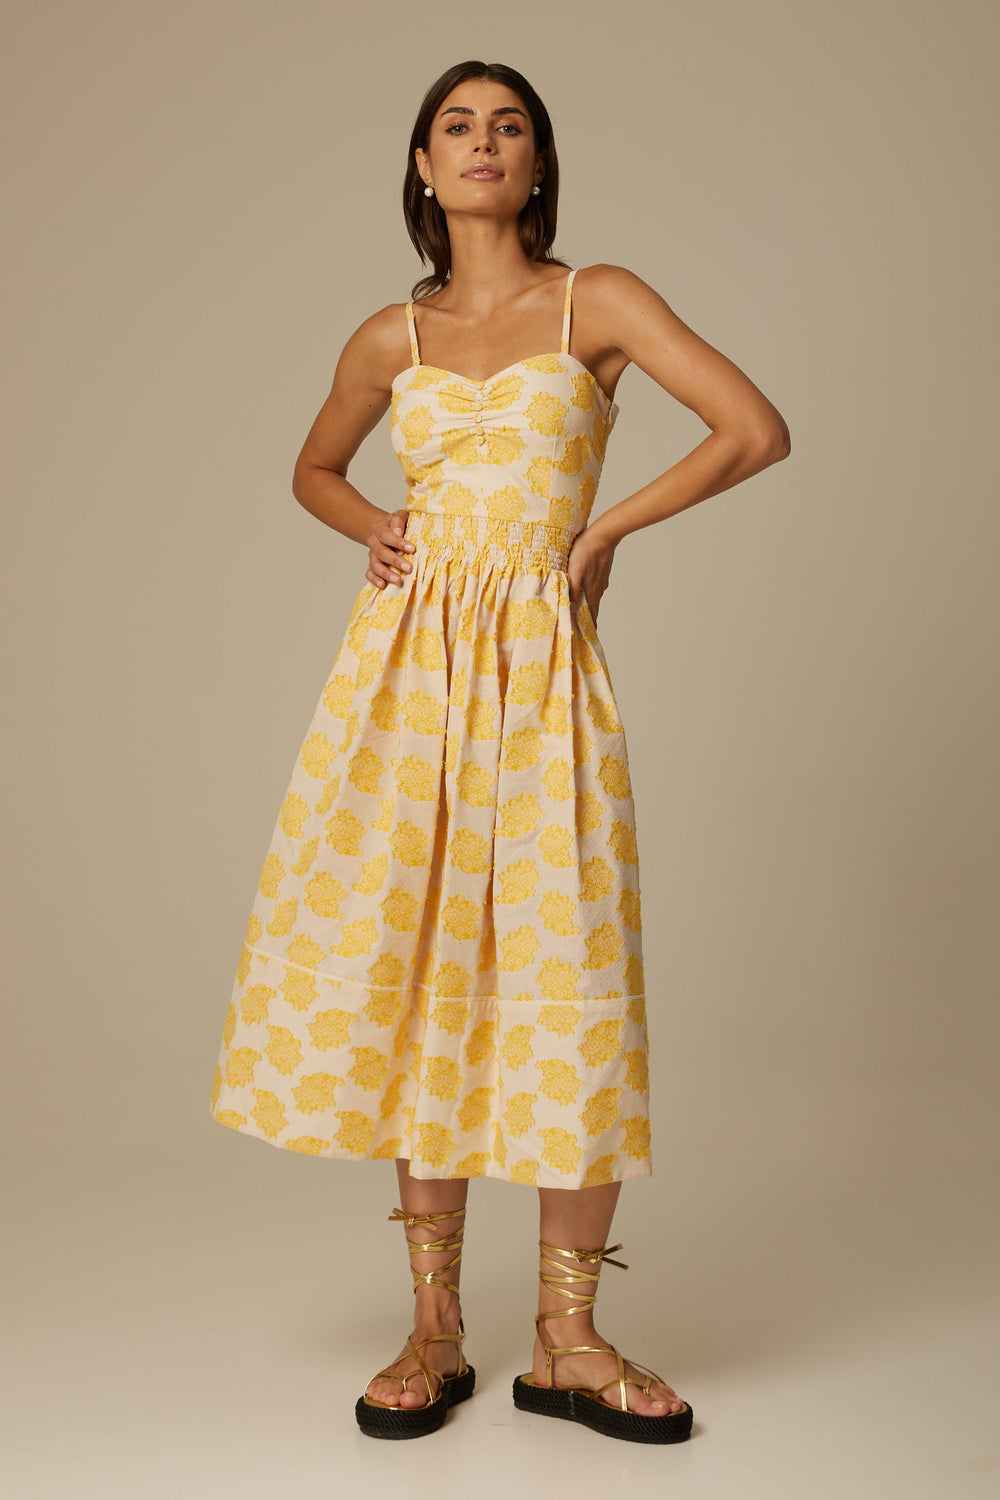 MIRIA STRAPPY COTTON DRESS IN YELLOW FLORAL